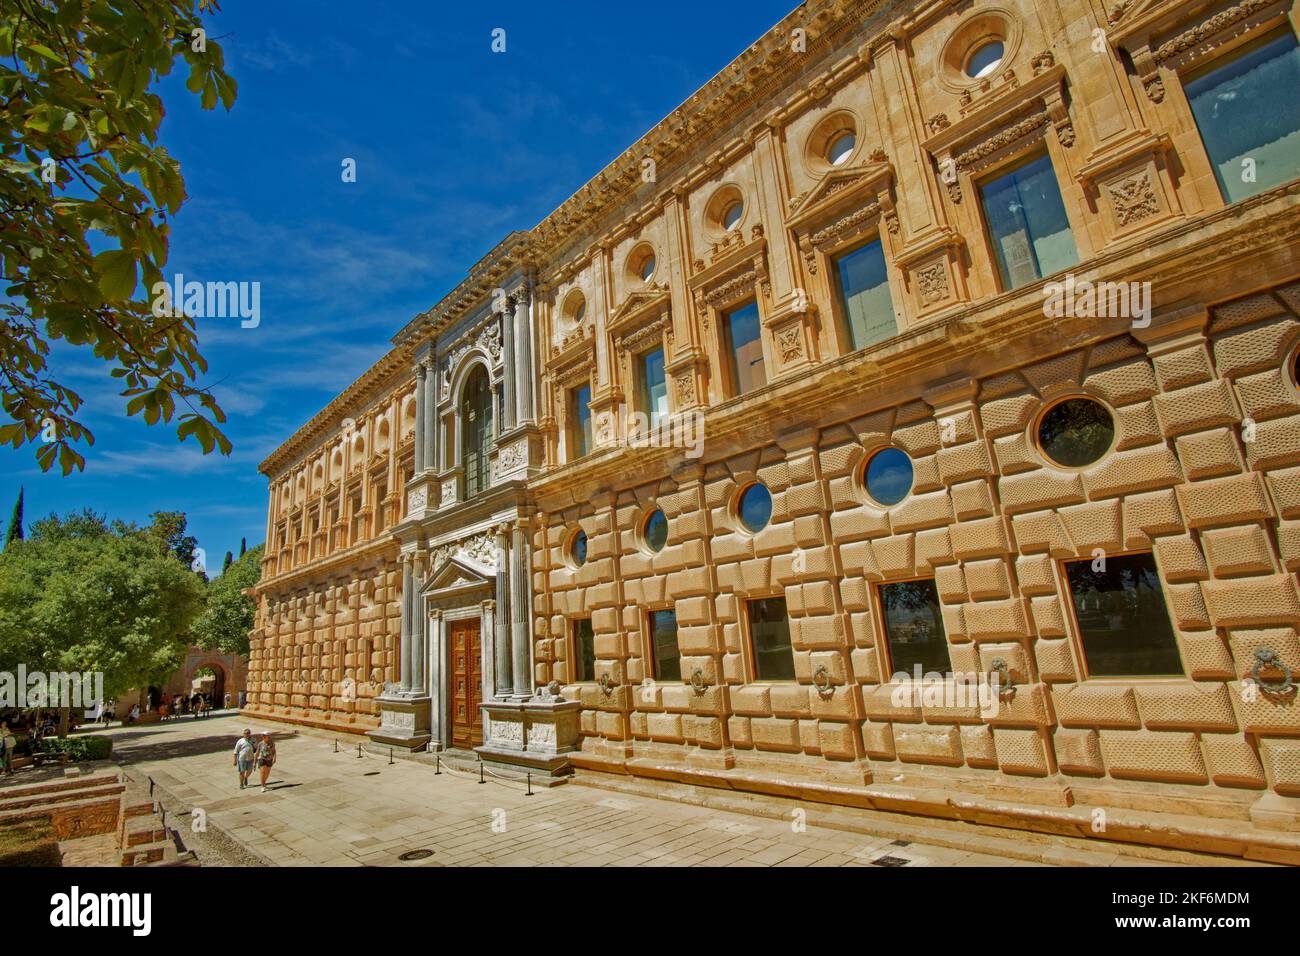 The Palace of Charles 5th of Spain situated within the Nasrid Palace complex at Granada, Spain. Stock Photo